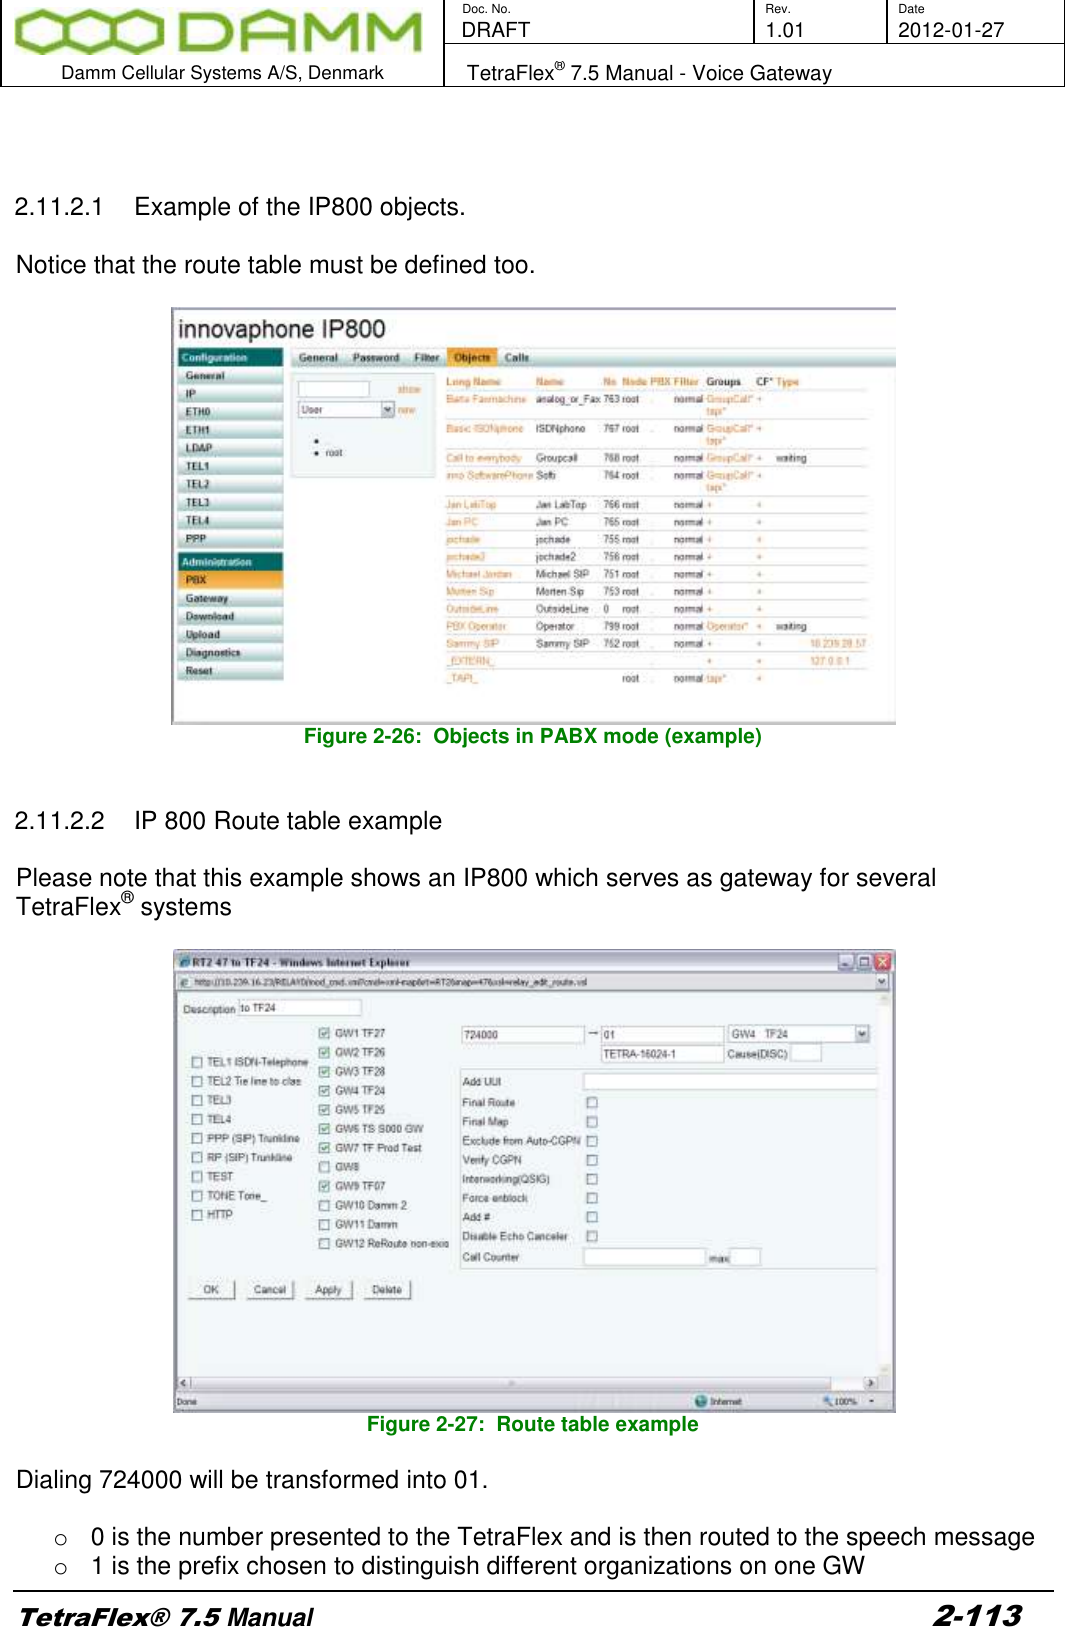        Doc. No. Rev. Date    DRAFT  1.01 2012-01-27  Damm Cellular Systems A/S, Denmark   TetraFlex® 7.5 Manual - Voice Gateway  TetraFlex® 7.5 Manual 2-113    2.11.2.1  Example of the IP800 objects.  Notice that the route table must be defined too.   Figure 2-26:  Objects in PABX mode (example)   2.11.2.2  IP 800 Route table example  Please note that this example shows an IP800 which serves as gateway for several TetraFlex® systems   Figure 2-27:  Route table example  Dialing 724000 will be transformed into 01.  o  0 is the number presented to the TetraFlex and is then routed to the speech message o  1 is the prefix chosen to distinguish different organizations on one GW 